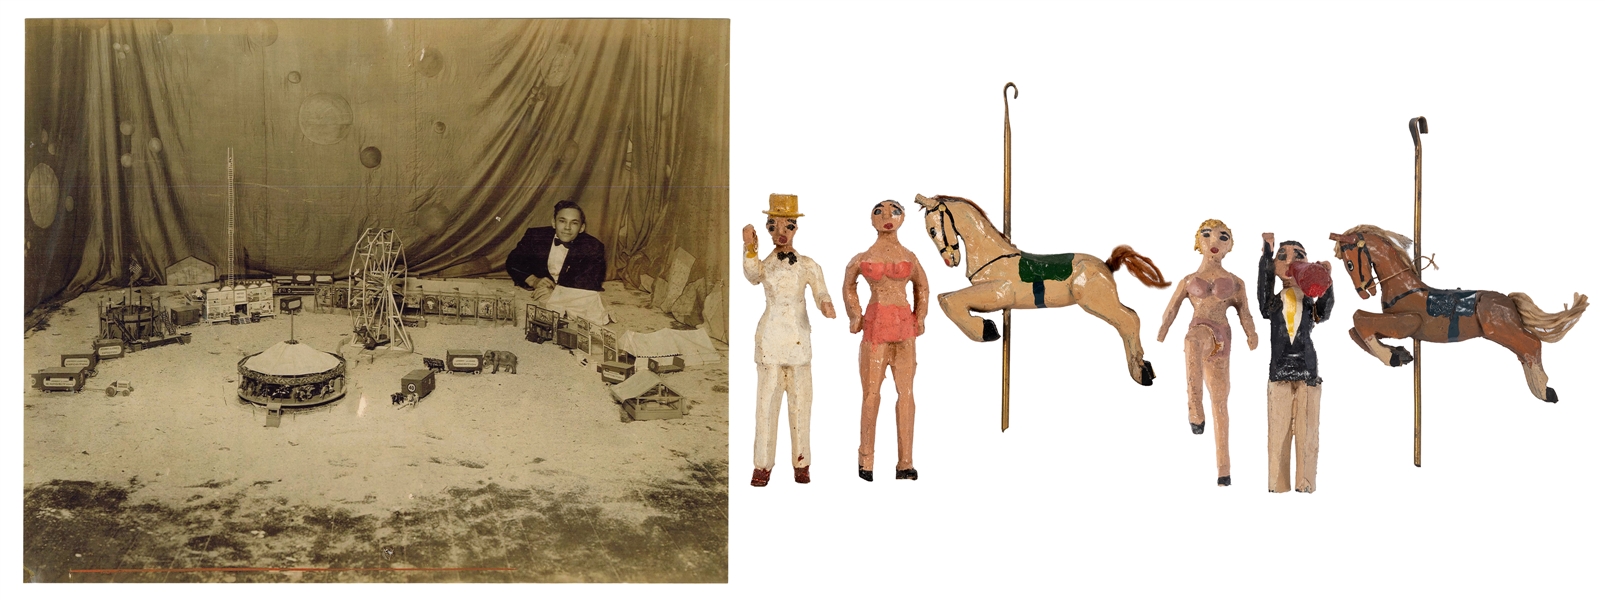 Johnny Eck “Pen Knife Circus” Wooden Figurines.